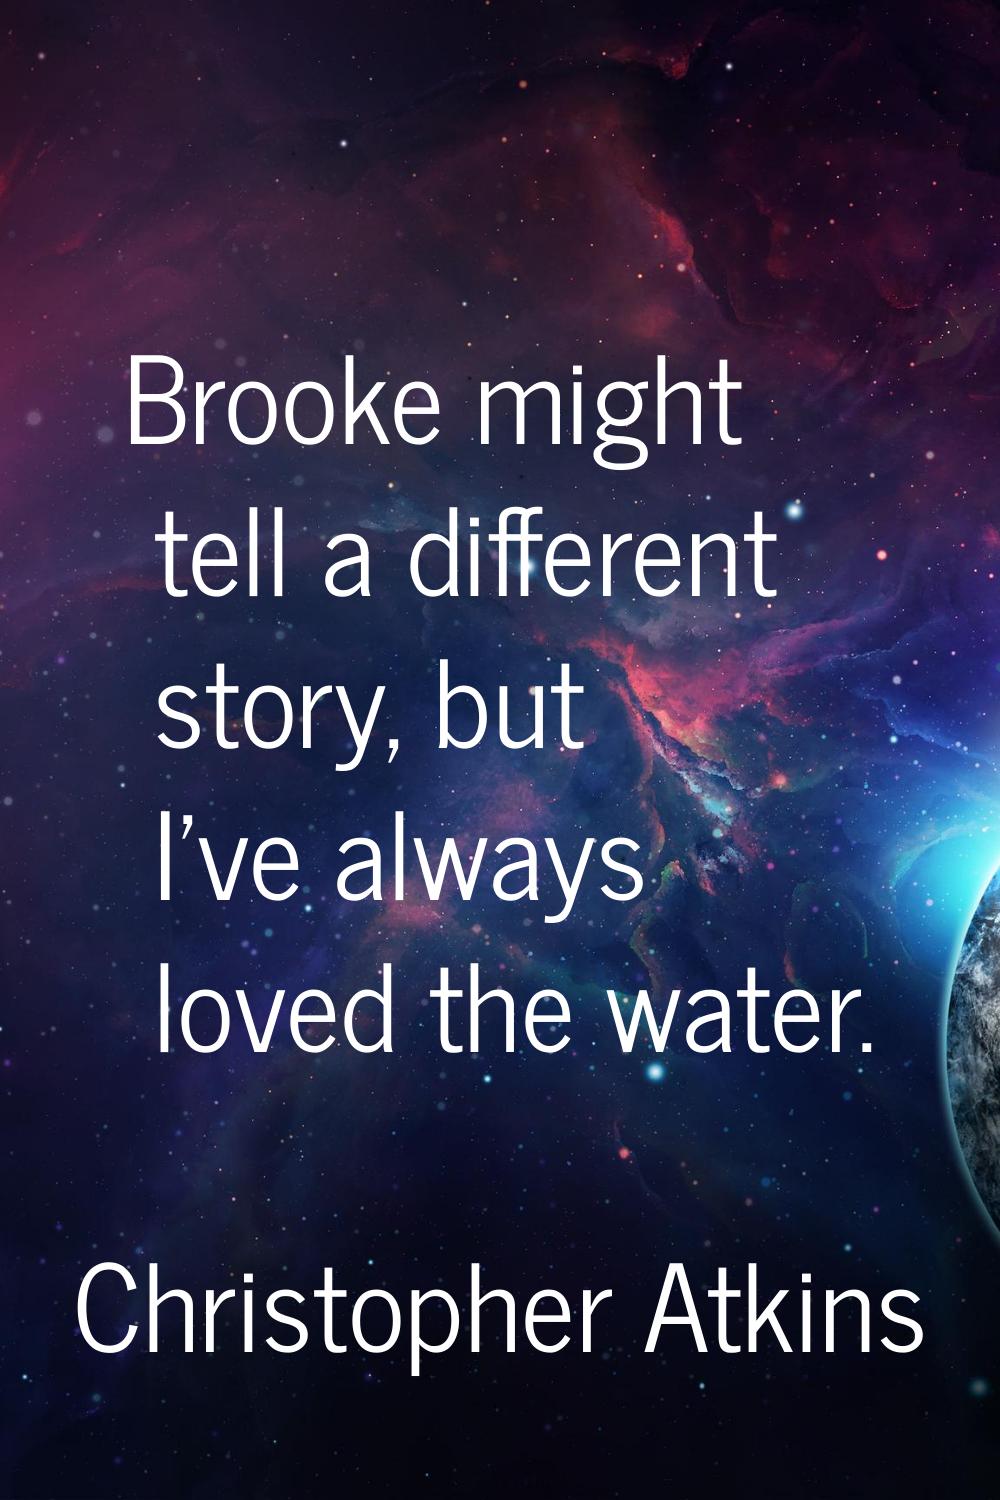 Brooke might tell a different story, but I've always loved the water.